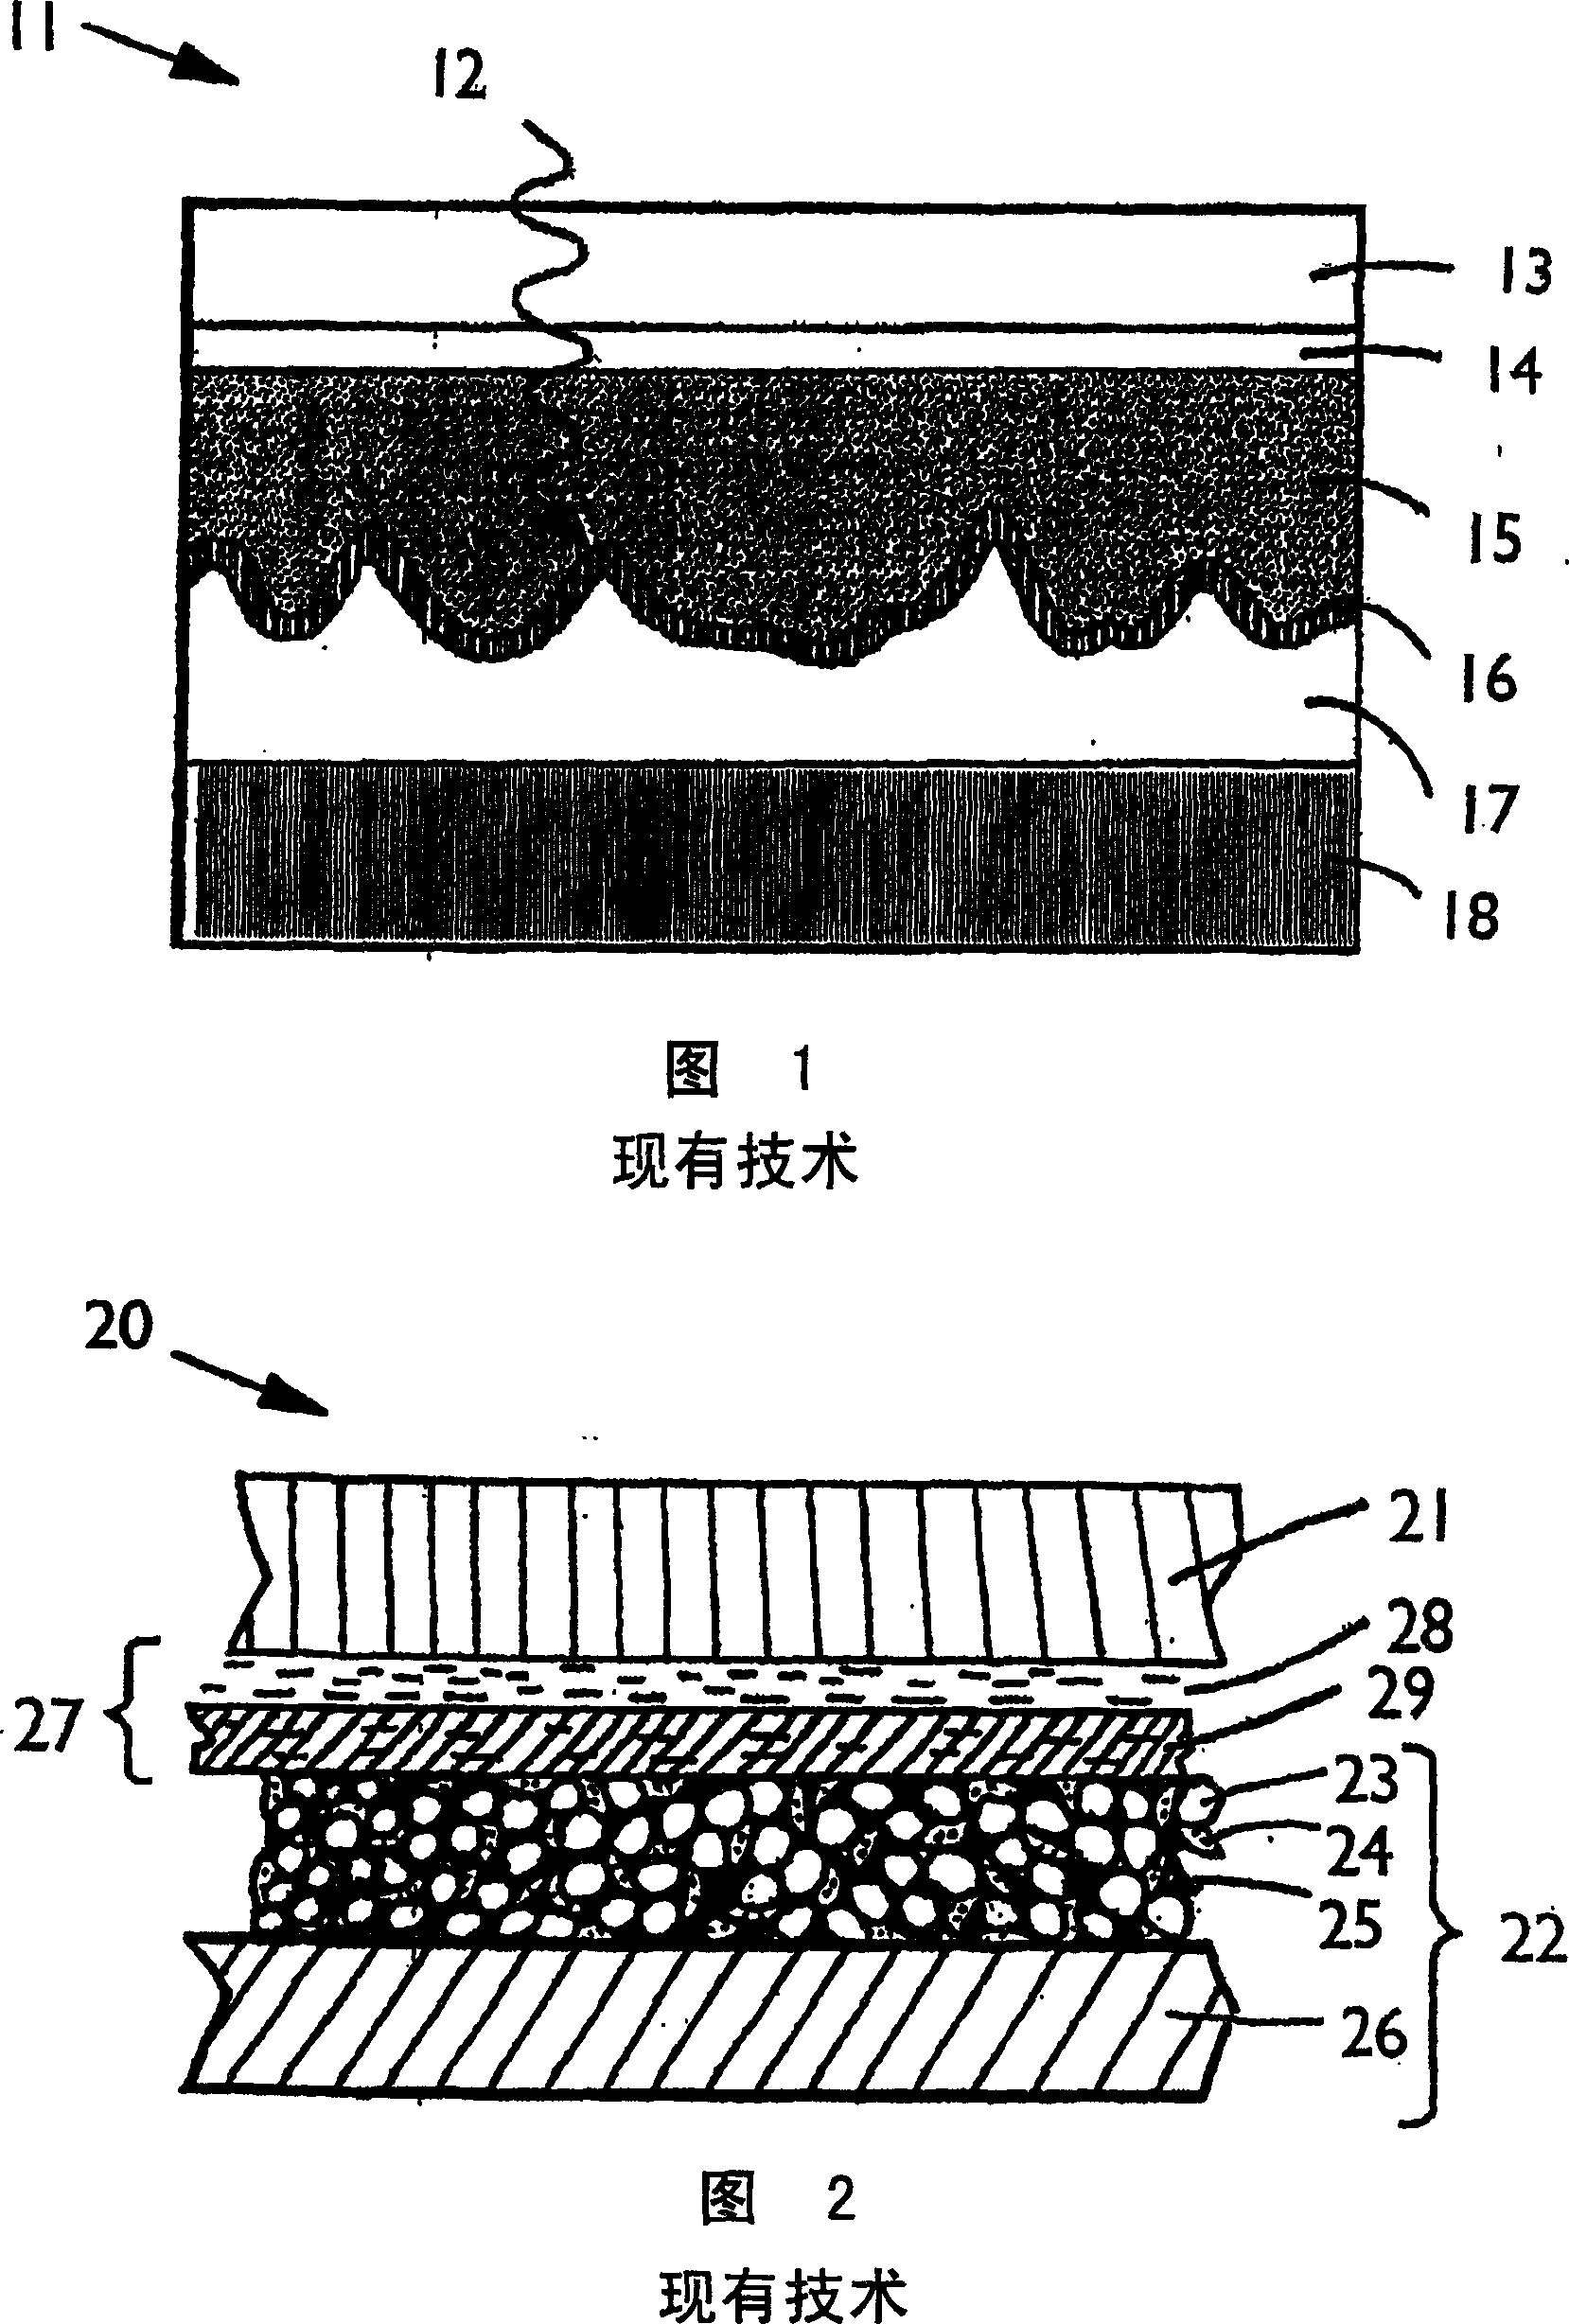 Mesoporous network electrode for electrochemical cell